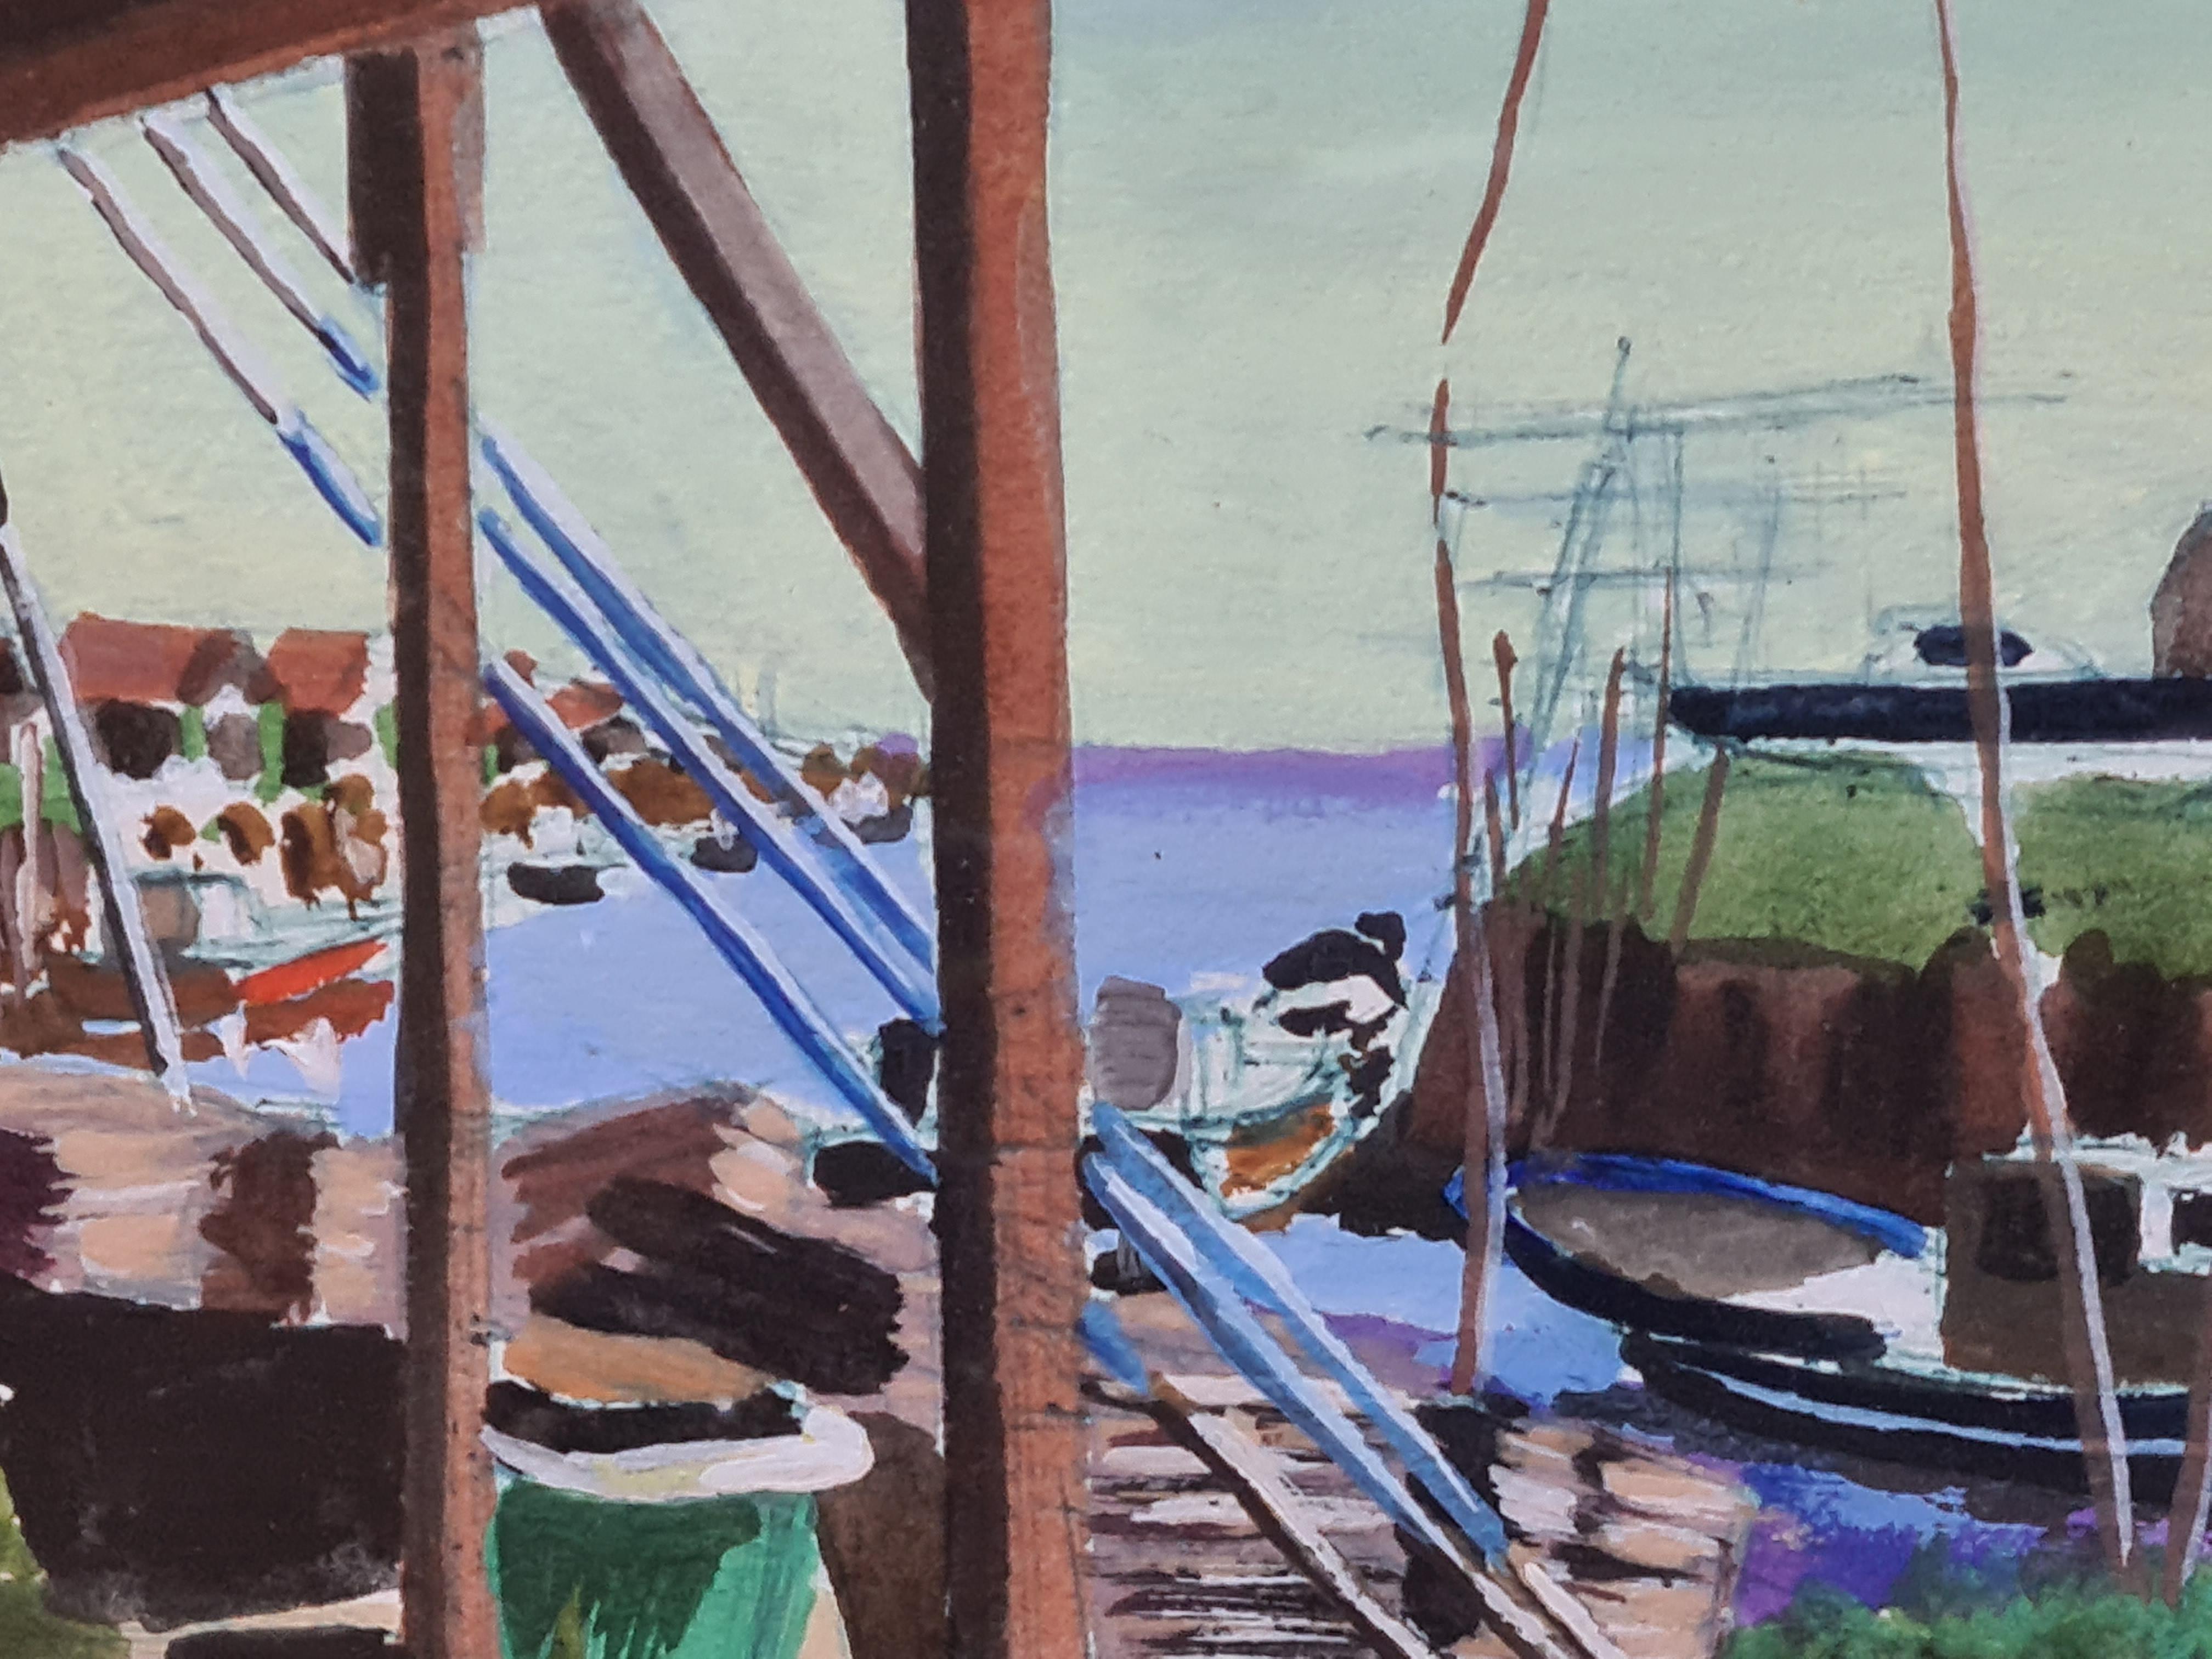 Watercolour view of boats in a port, looking out to sea, by French Painter Jean-Paul Claveau. The painting is signed and dated bottom left and presented in painted wood frame, with card mount, under glass.

A bright and colourful harbour scene, the